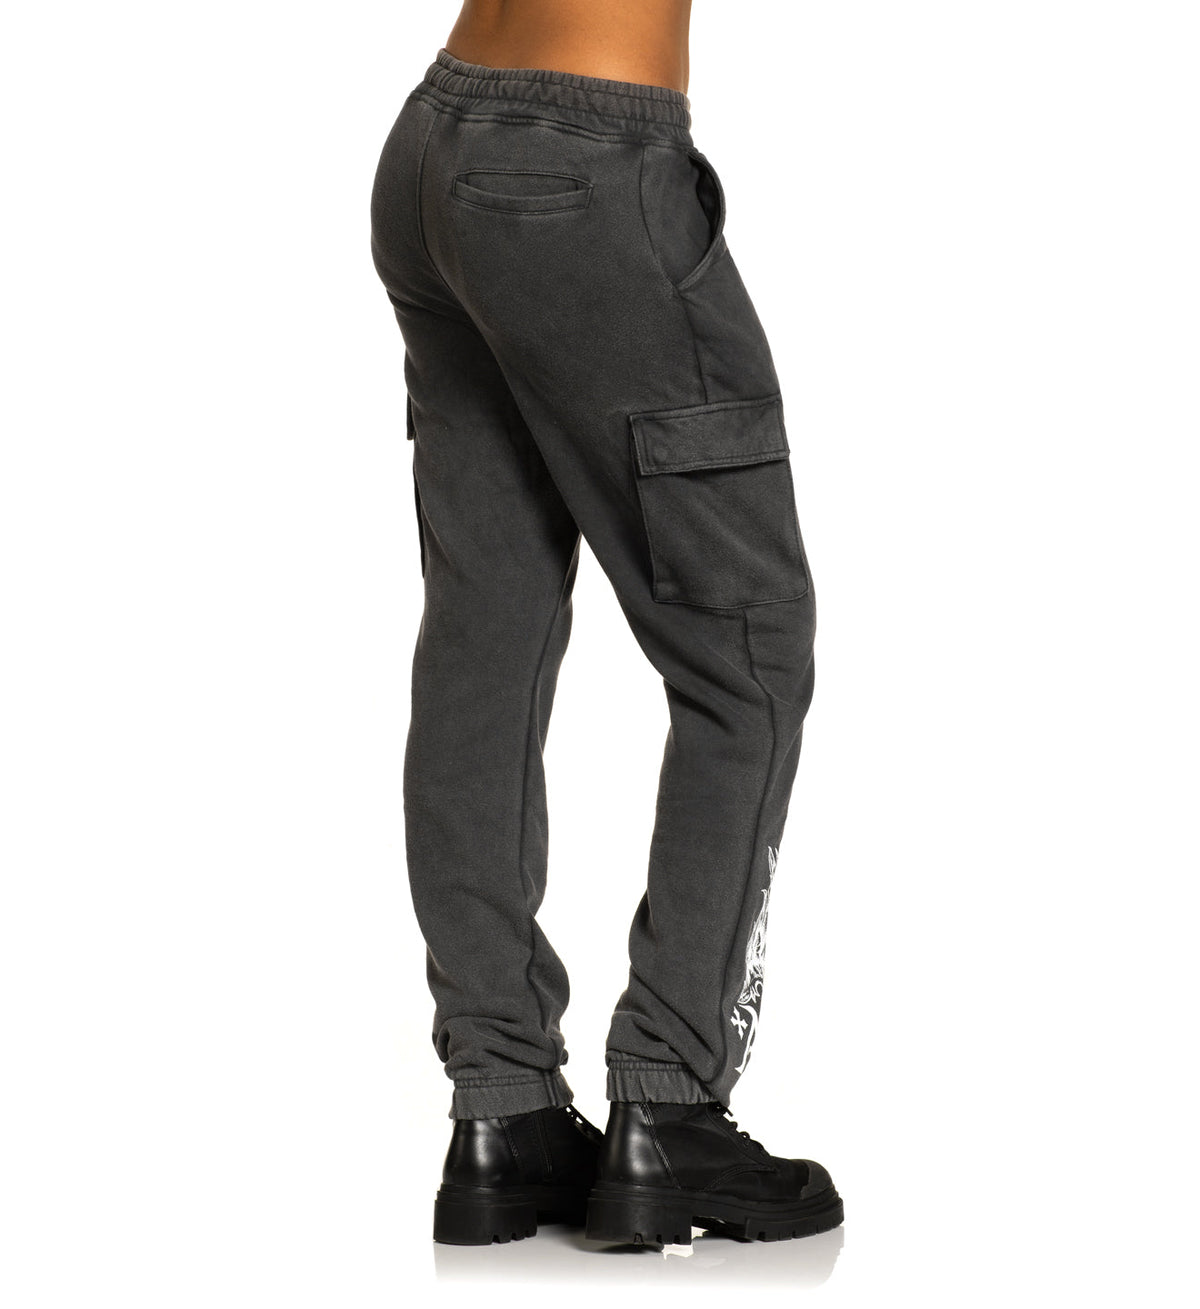 Womens Bottoms by Affliction | Shorts, Jeans, And Sweatpants ...